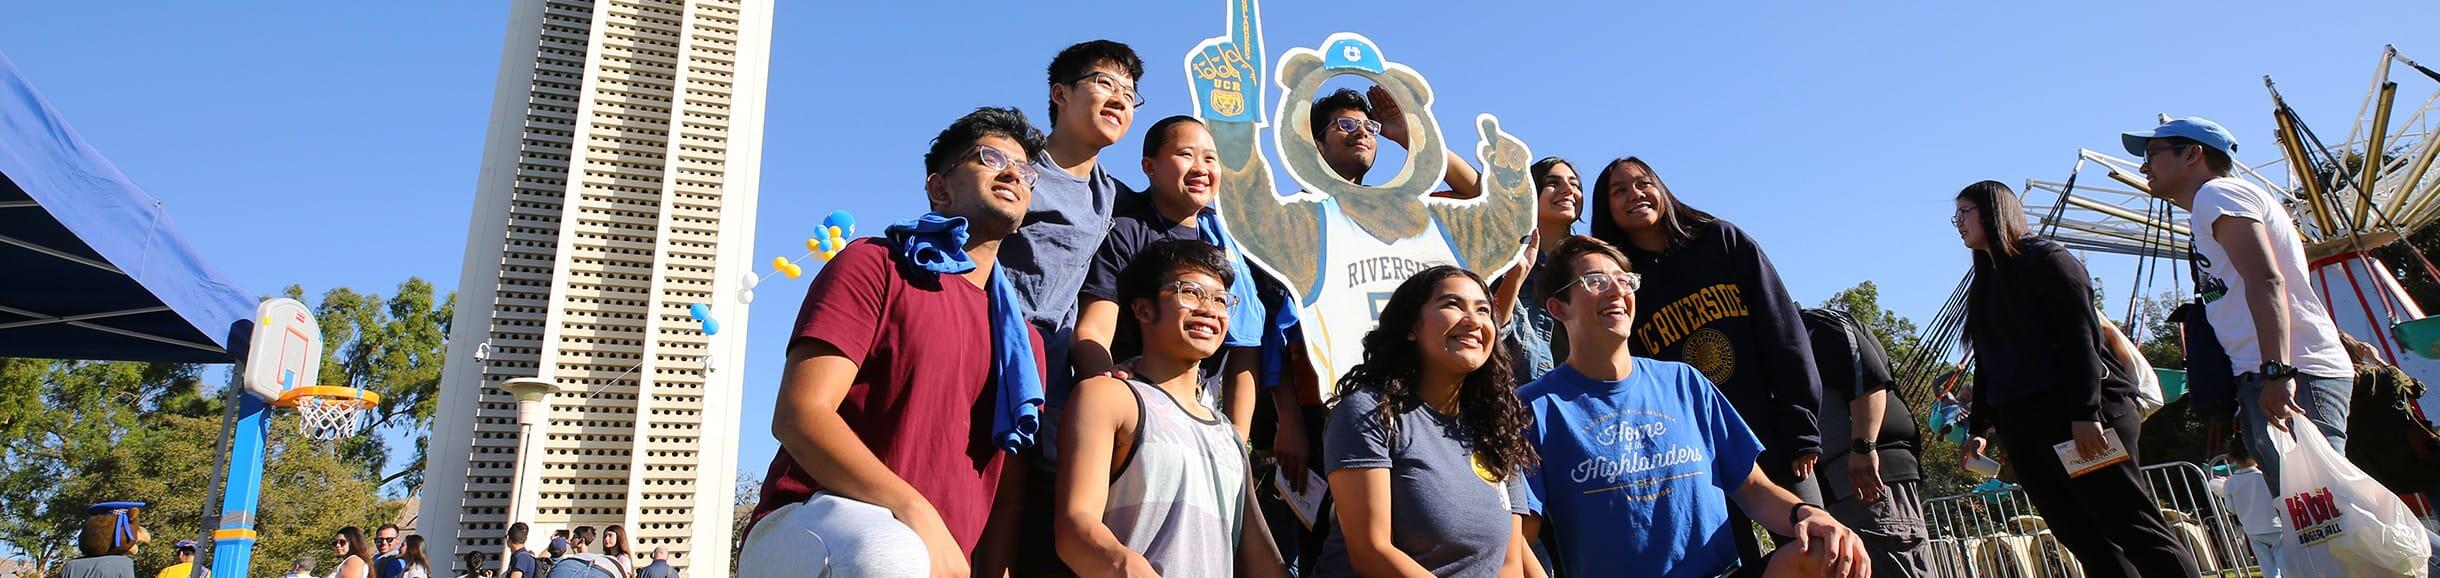 UCR students at a campus event